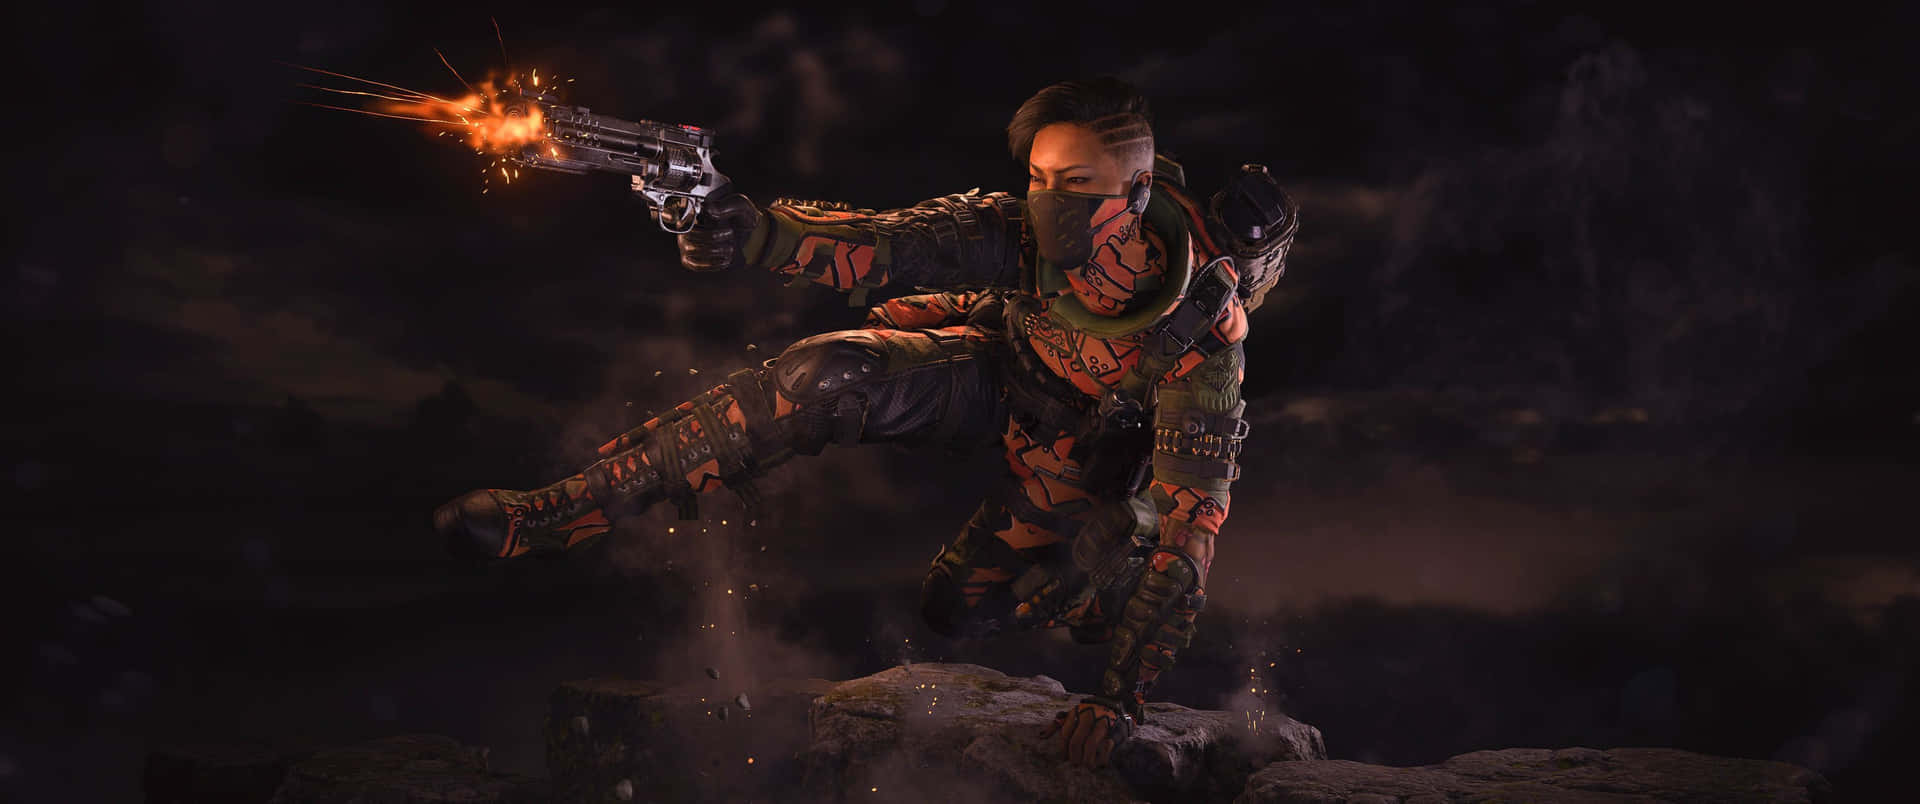 3440x1440 Game Call Of Duty: Black Ops 4